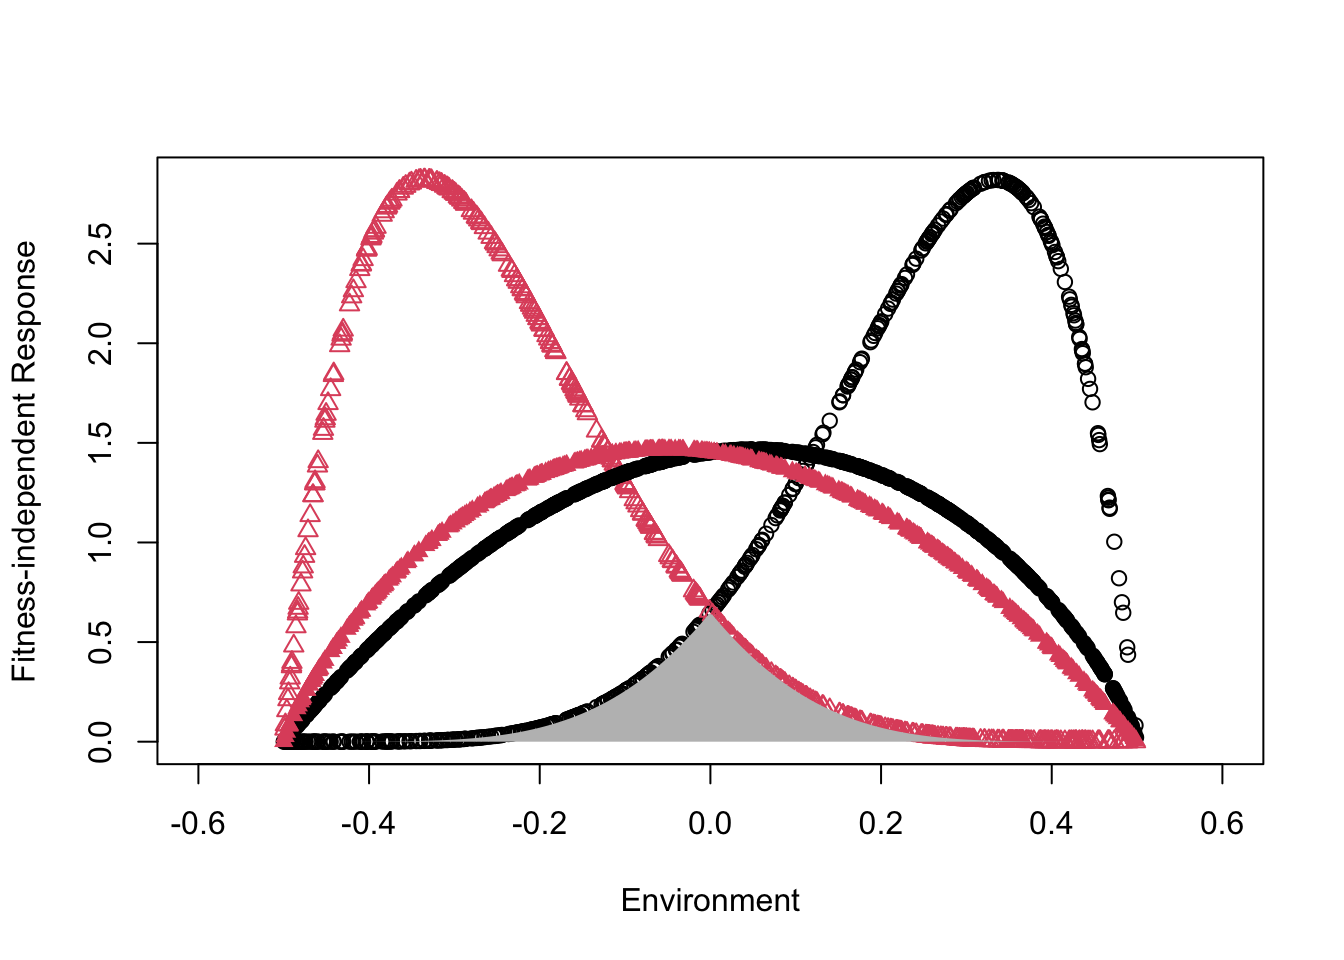 Species responses to the environment, using the `chesson` model. Relative to the pair of species represented by solid circles, the pair of species with open symbols shows greater difference between optimal environments (greater spread}), and narrower niches (greater specialization).  The underlying Beta probability density distributions; the grey *area* under the curves of the more differentiated species is rho, the degree of niche overlap.